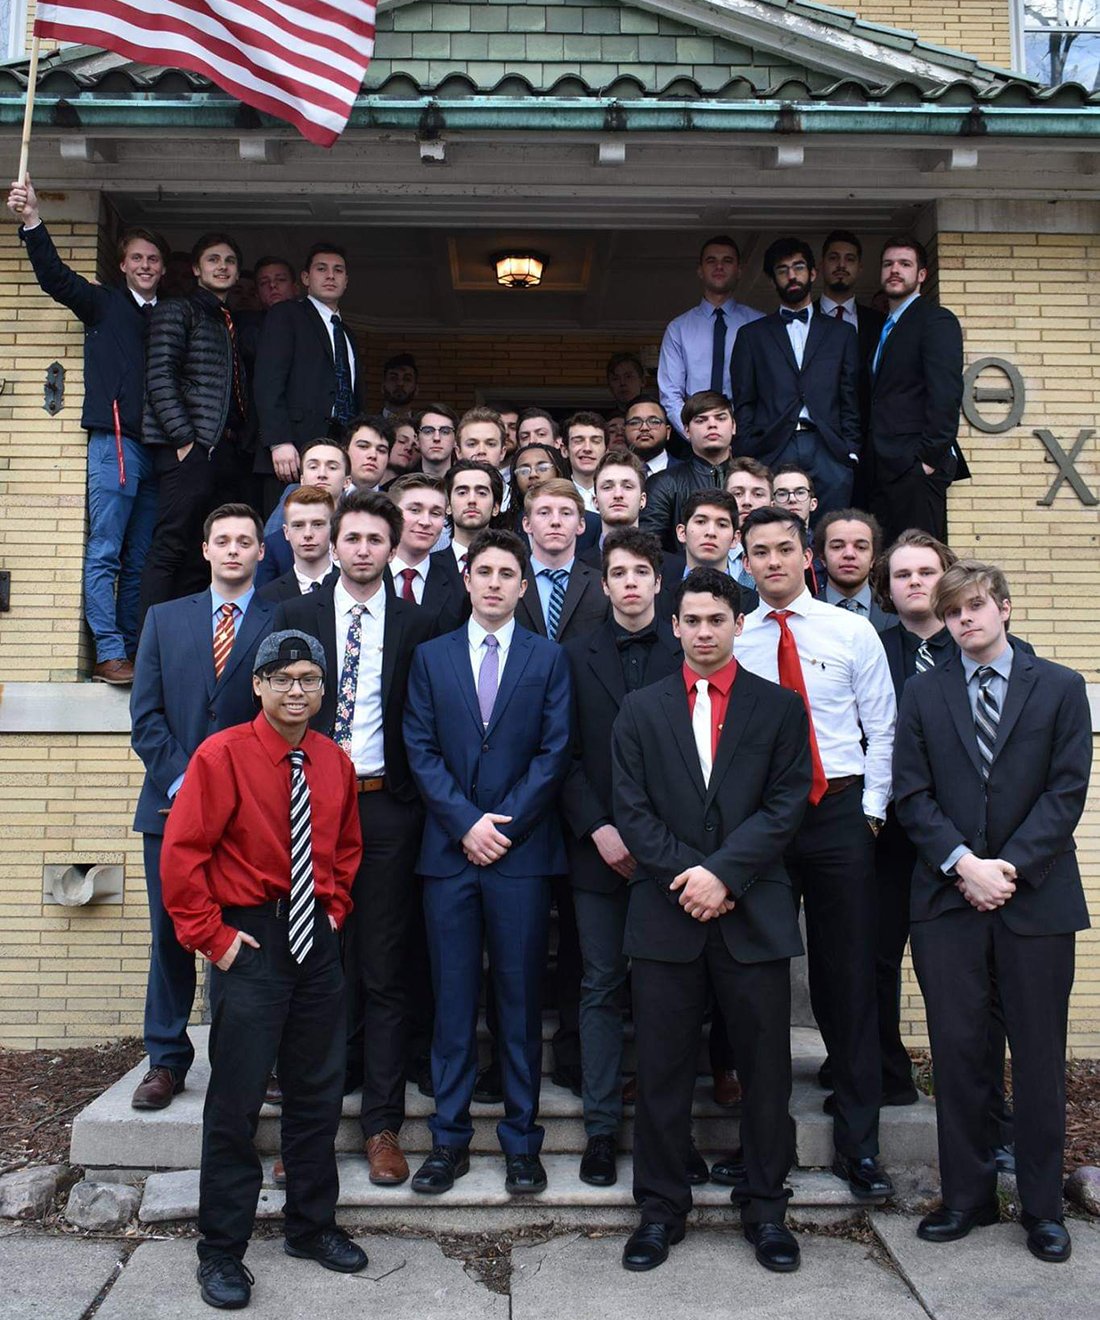 Members of Theta Chi Fraternity standing outside the fraternity house